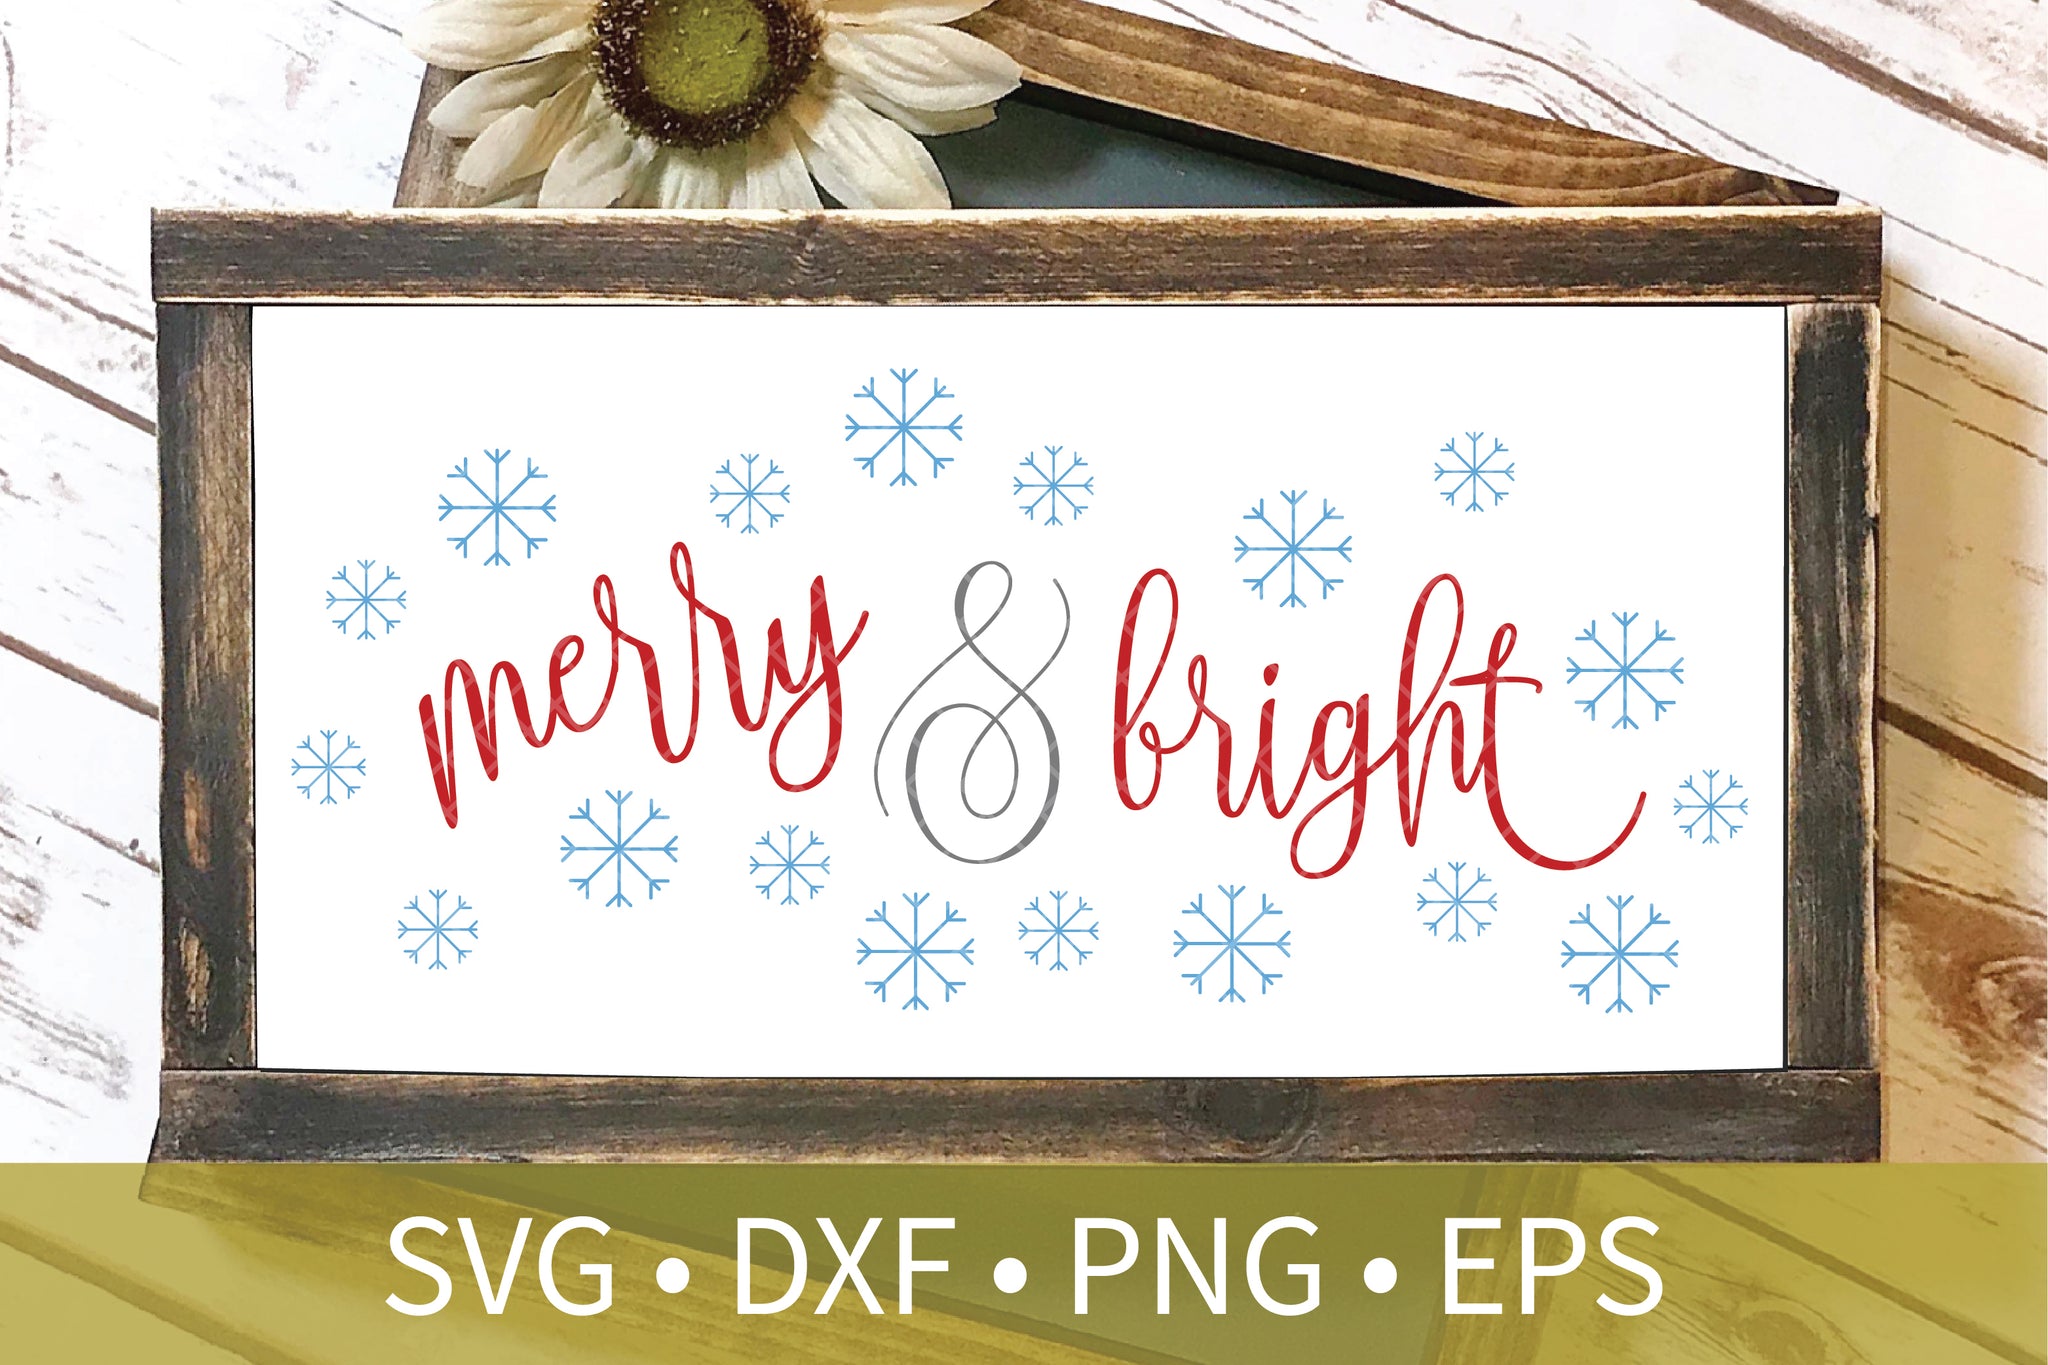 Merry and Bright Snowlakes svg dxf eps png file - Christmas svg dxf clipart - Christmas Decor DIY Craft - Christmas Sign Stencil